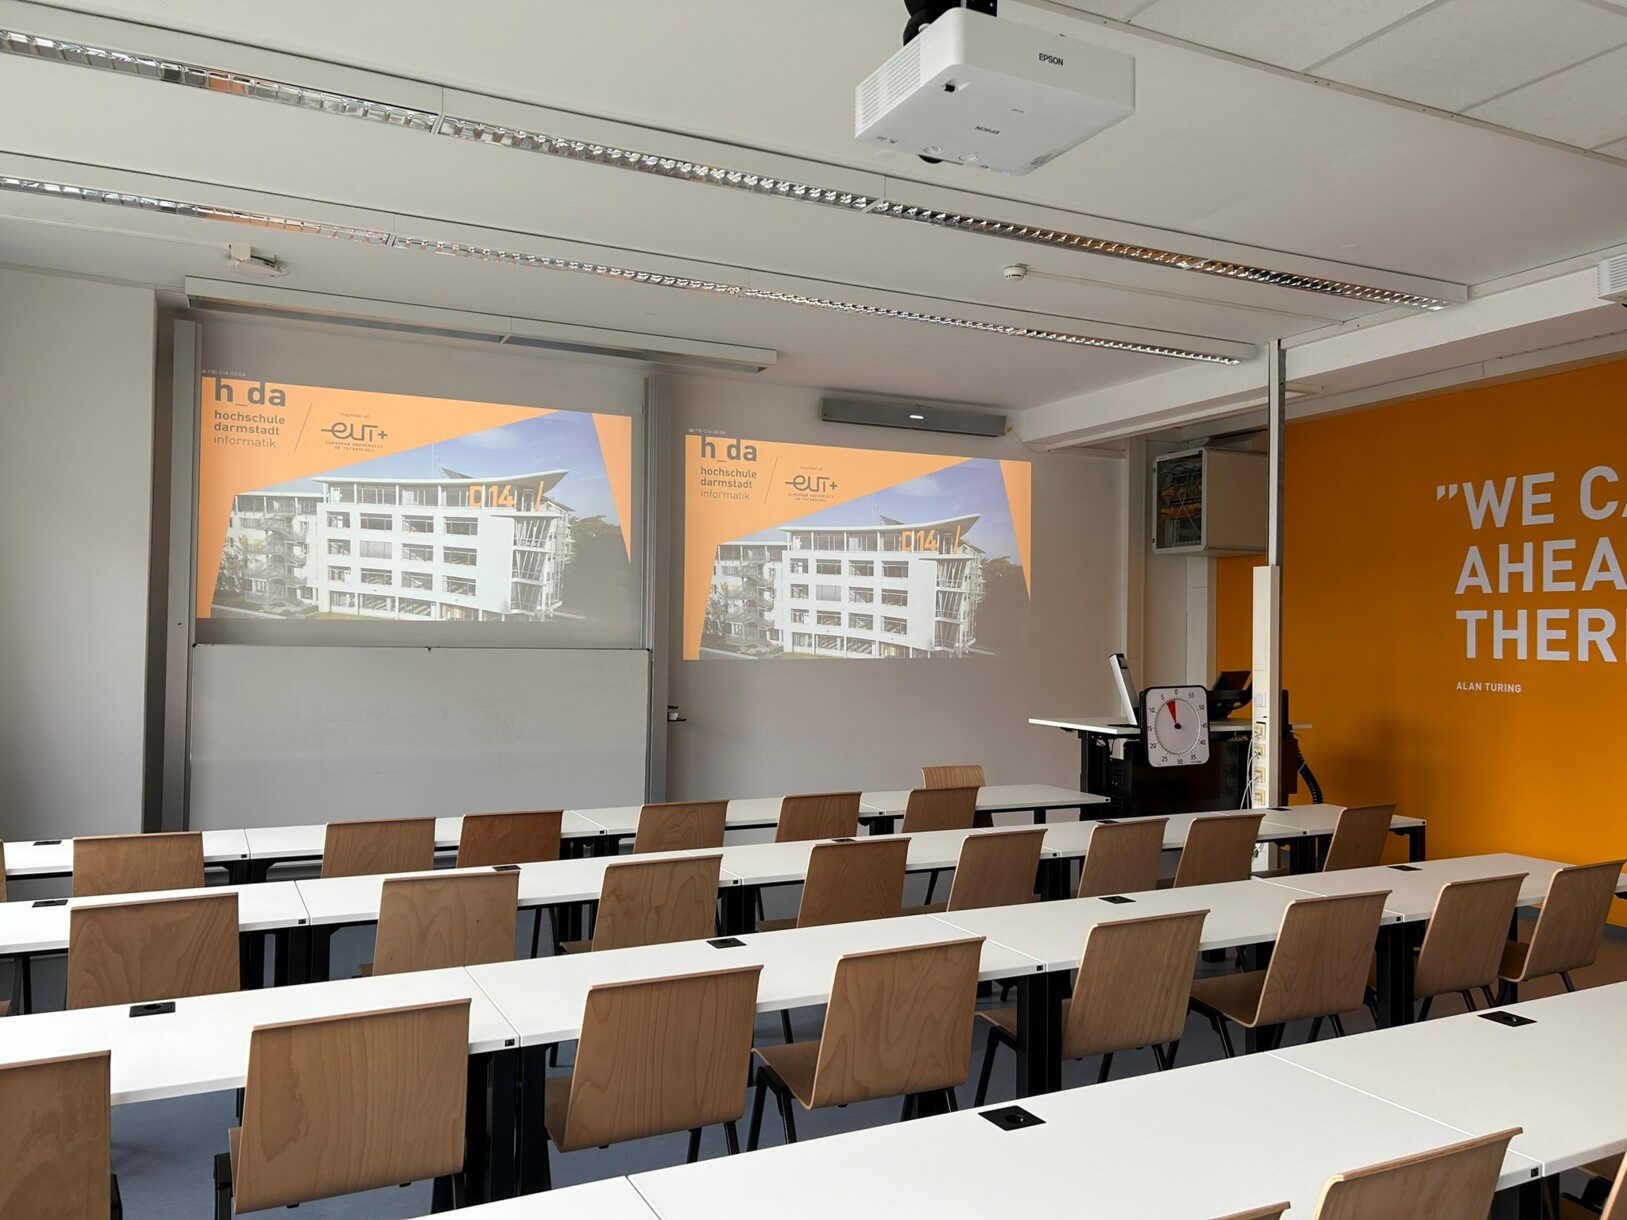 Cynap Pro-equipped seminar room at The Darmstadt University of Applied Sciences.